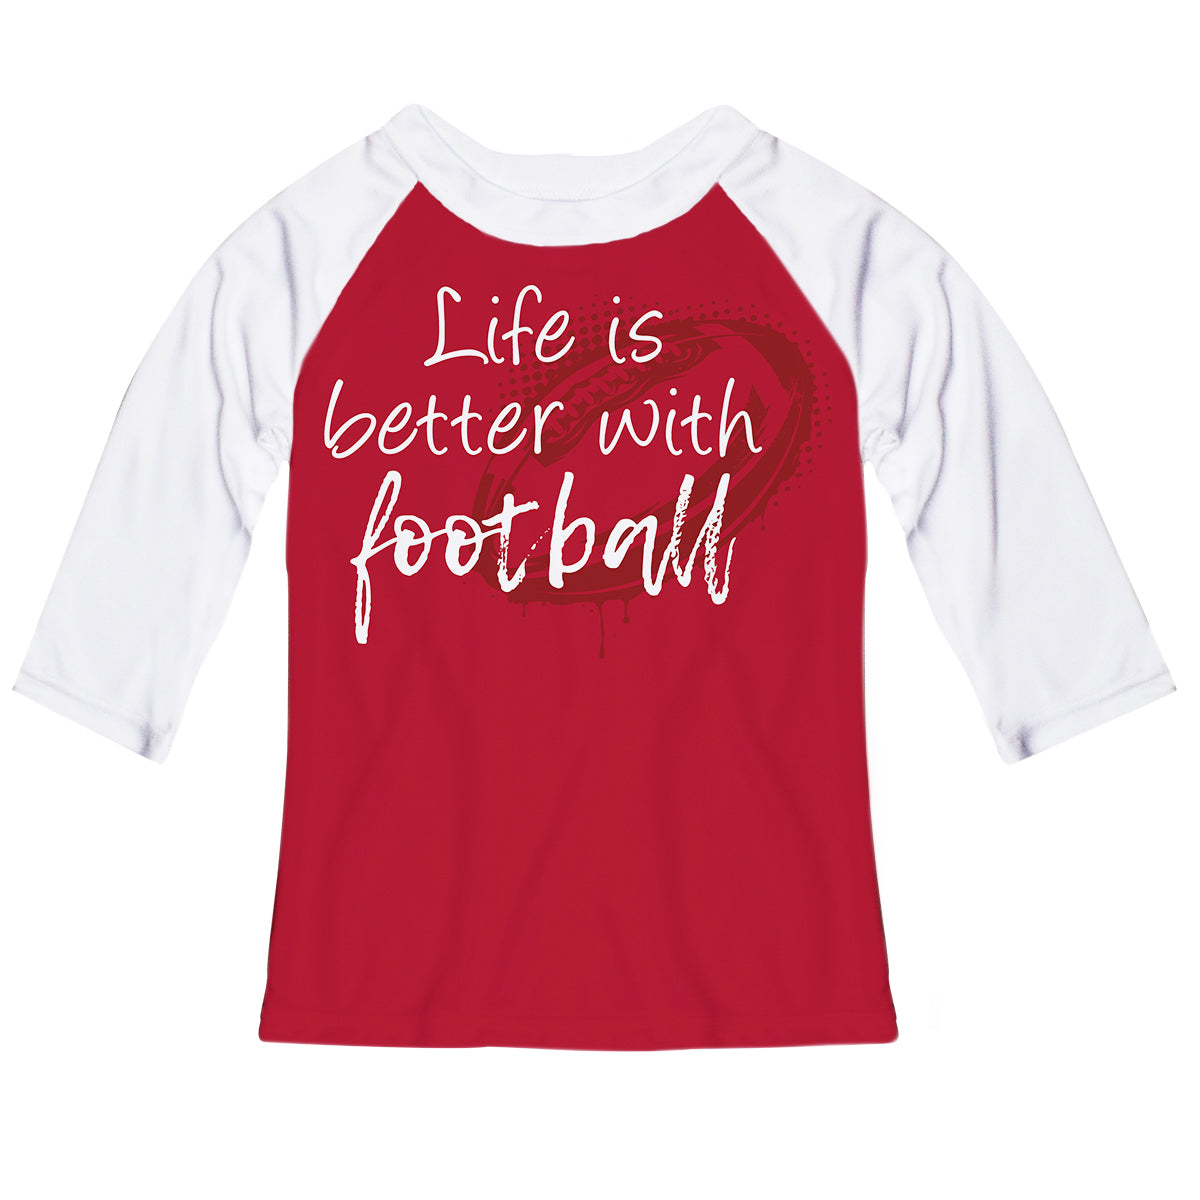 Life Better With Football Red and White Raglan Tee Shirt 3/4 Sleeve